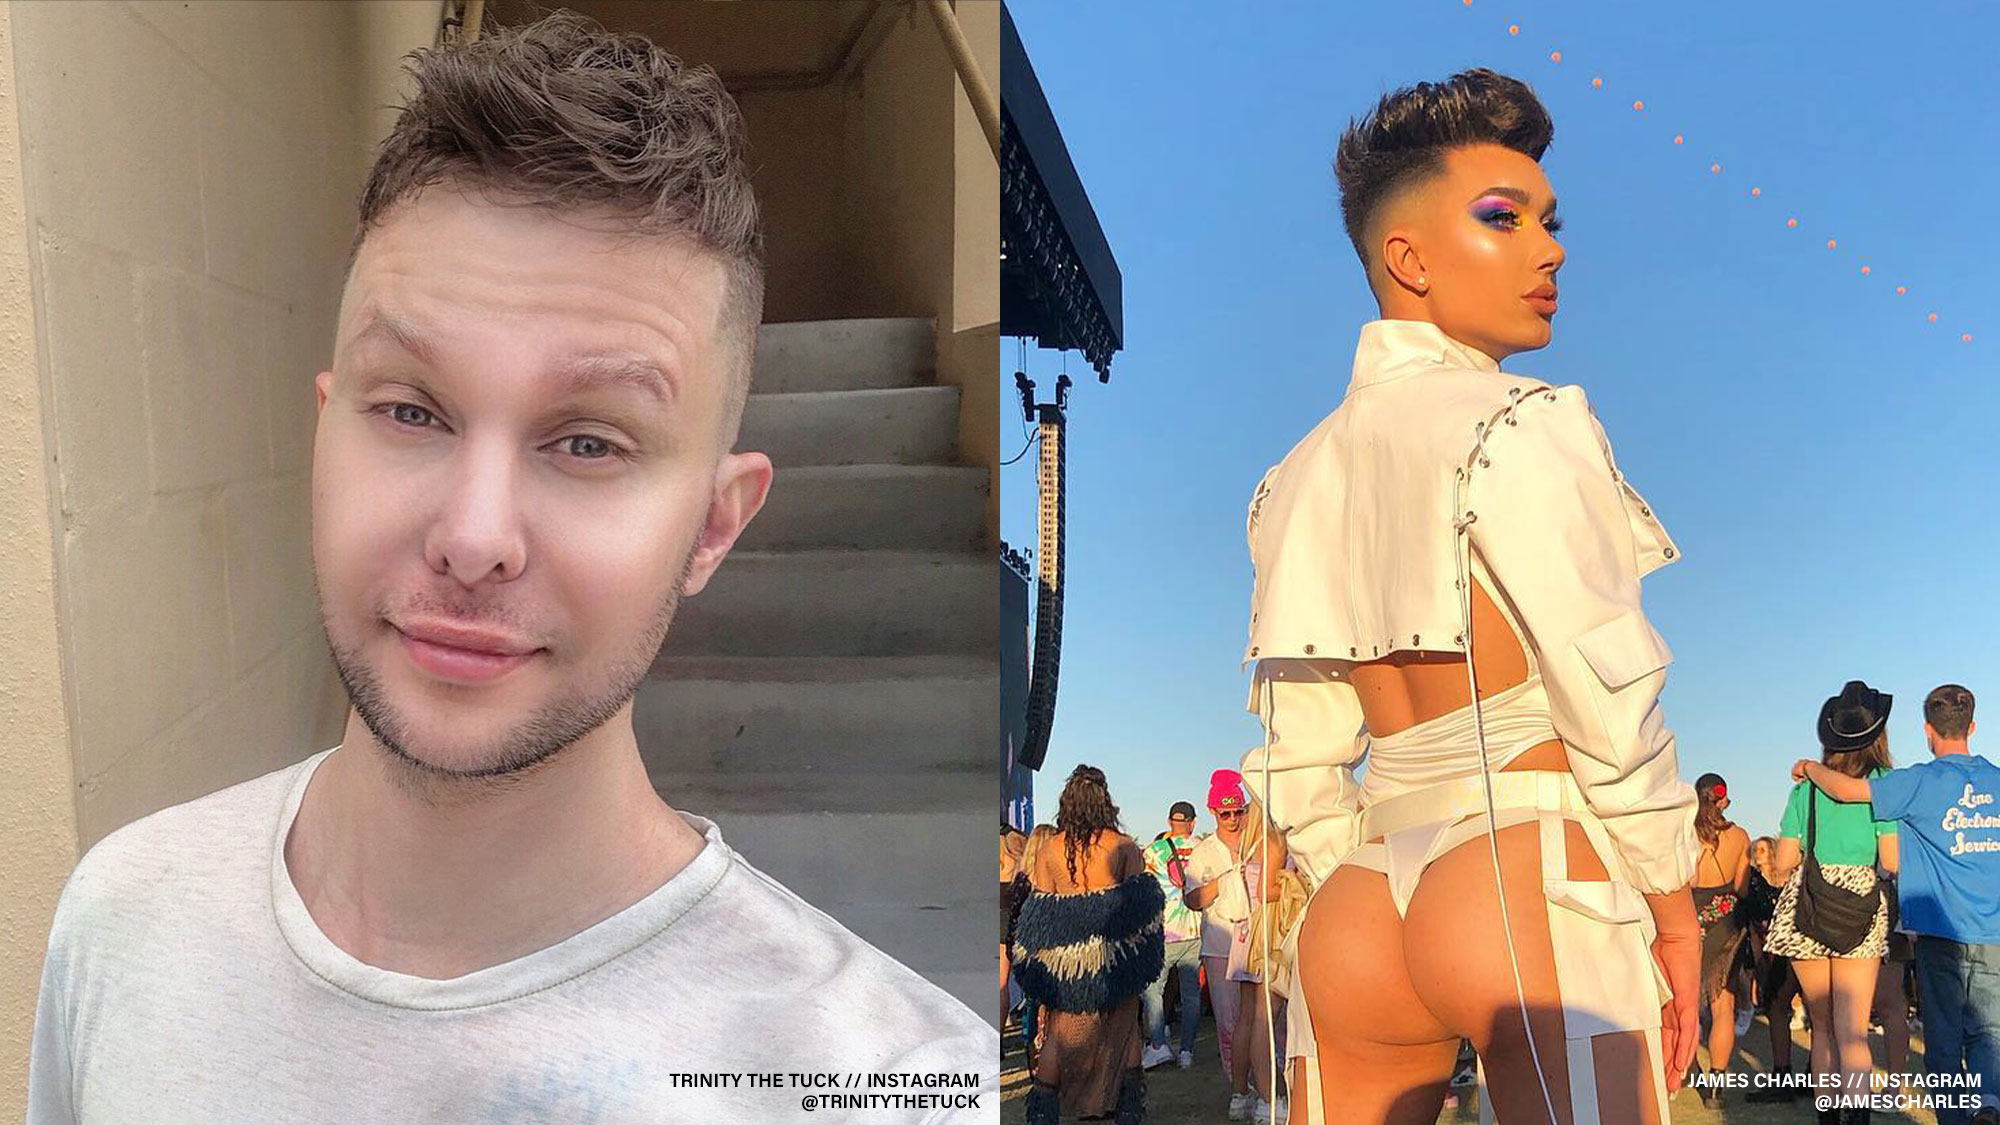 Trinity the Tuck & James Charles get in the dumbest Twitter fight over James'  fat ass - TheSword.com